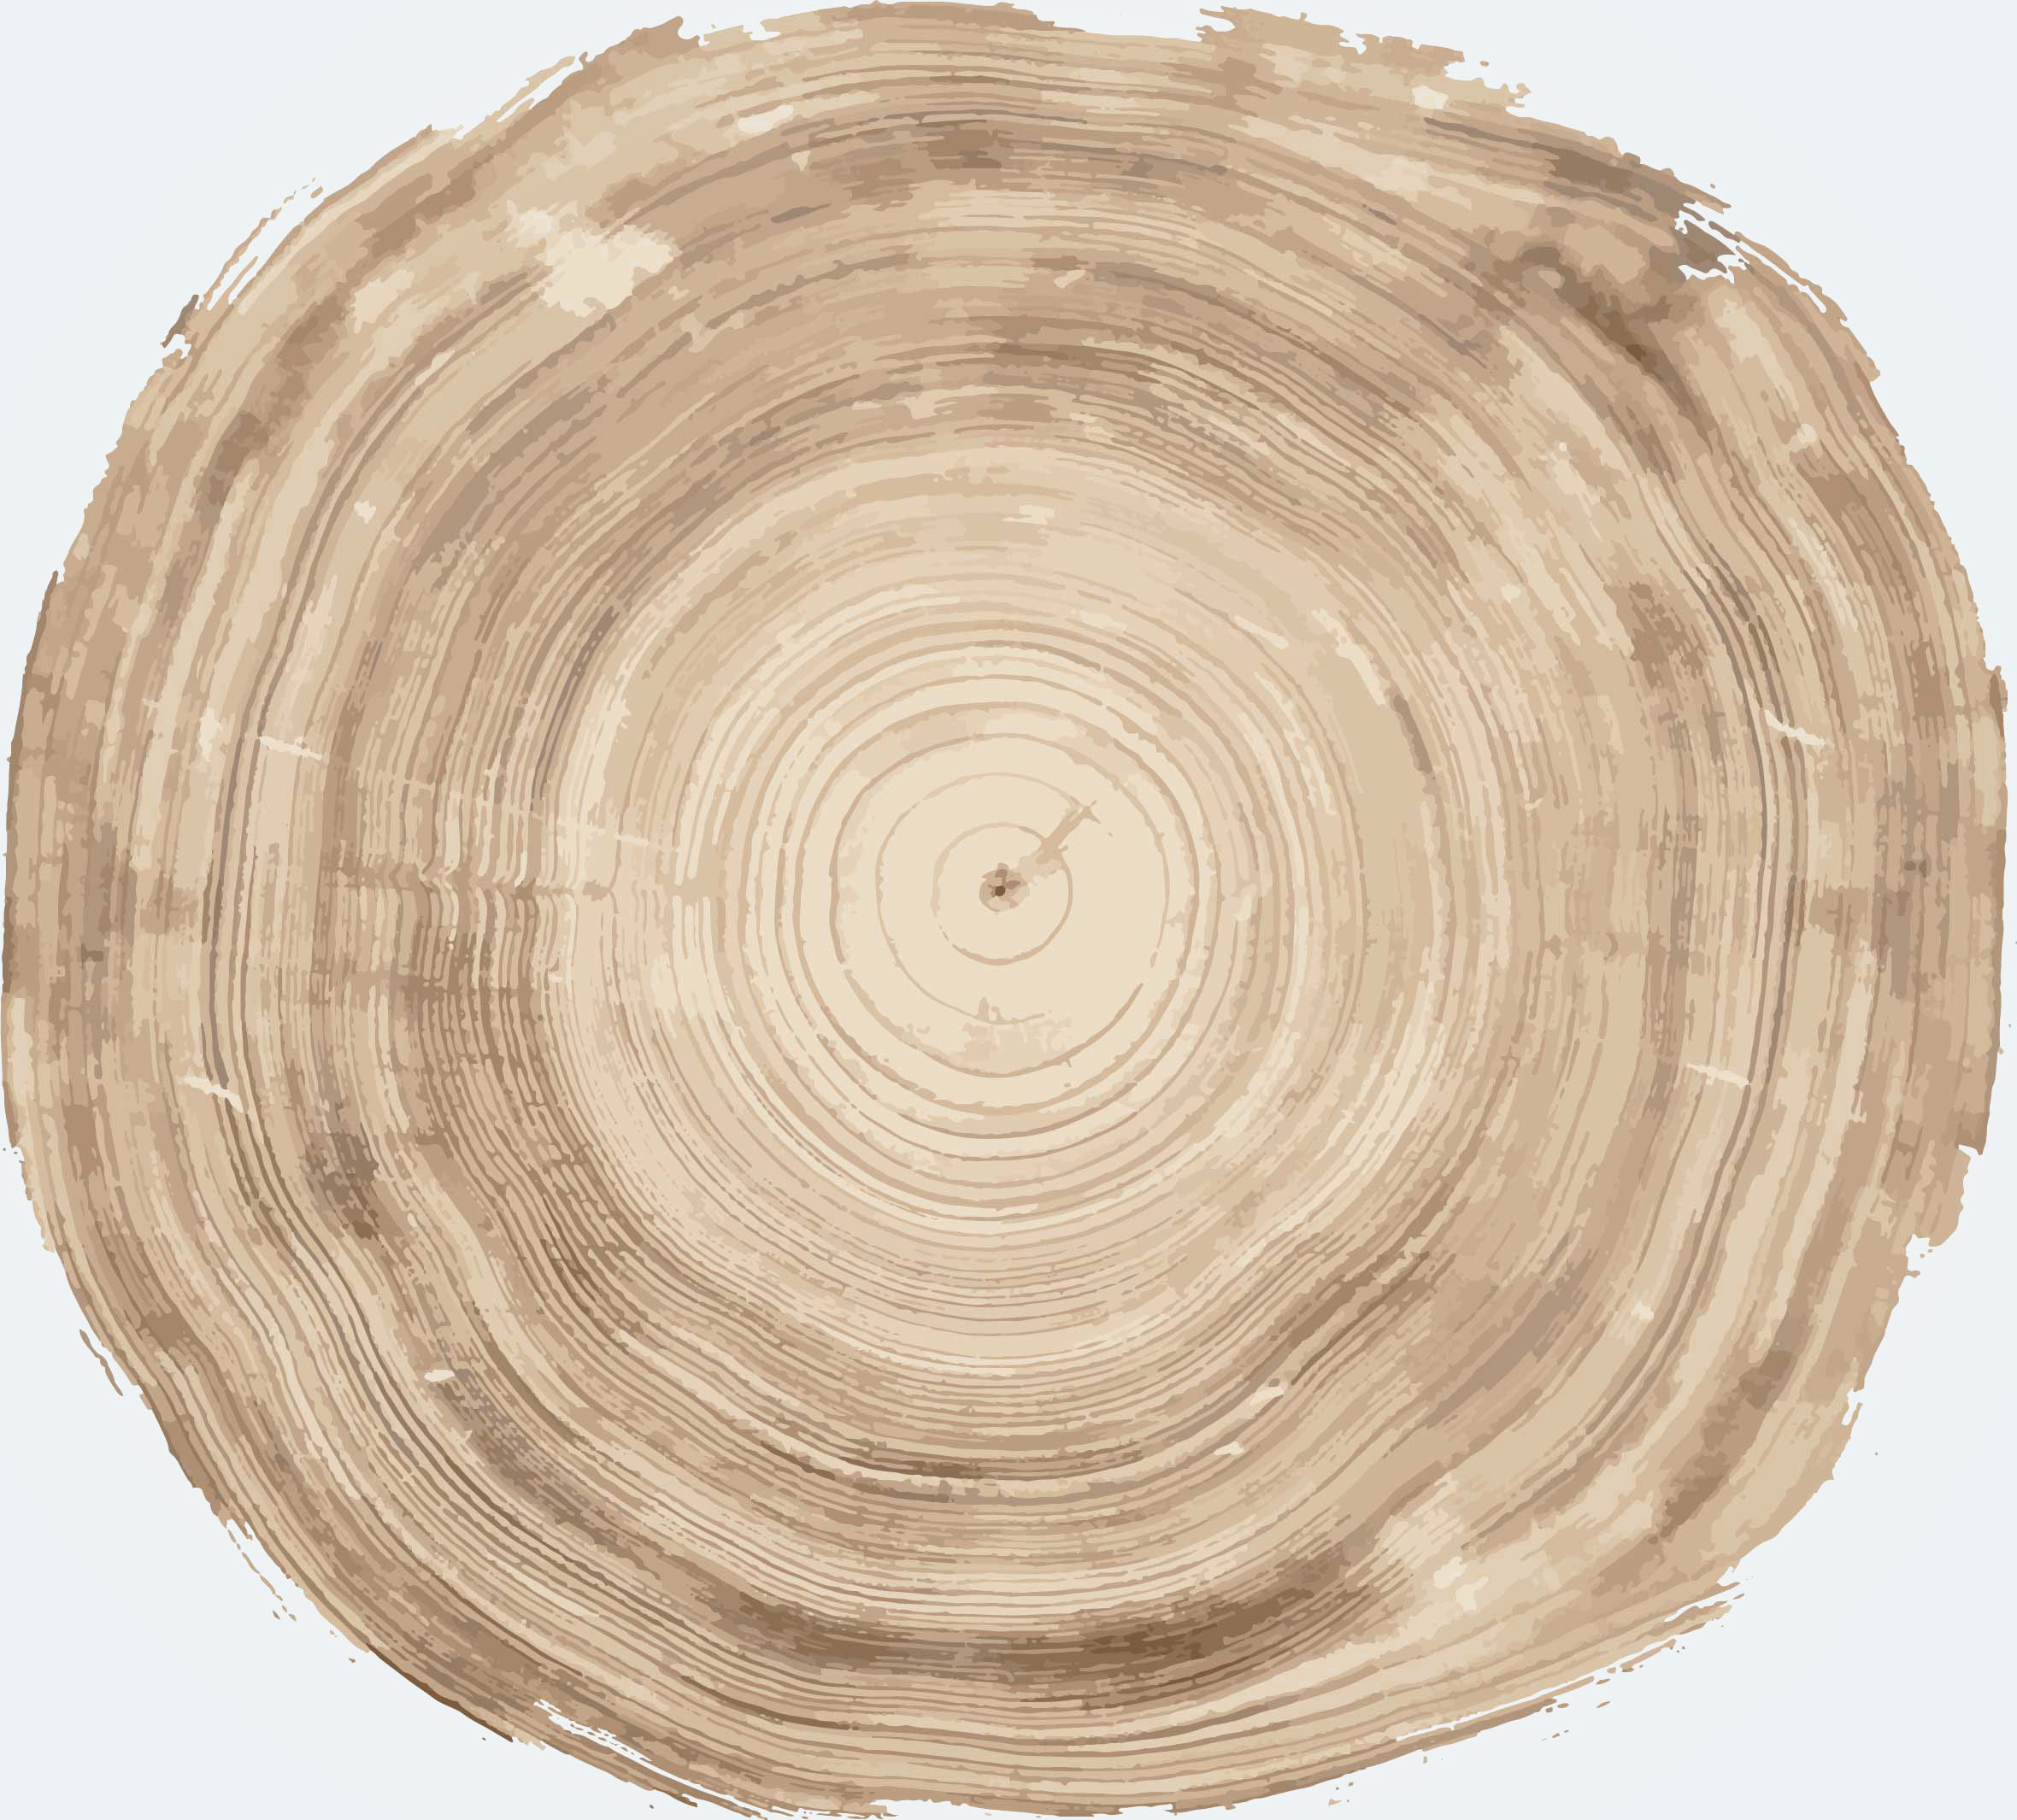 Tree rings. The following links are dates connected to the rings organized non-linearly. Clicking on a date will take you to more information about the date.